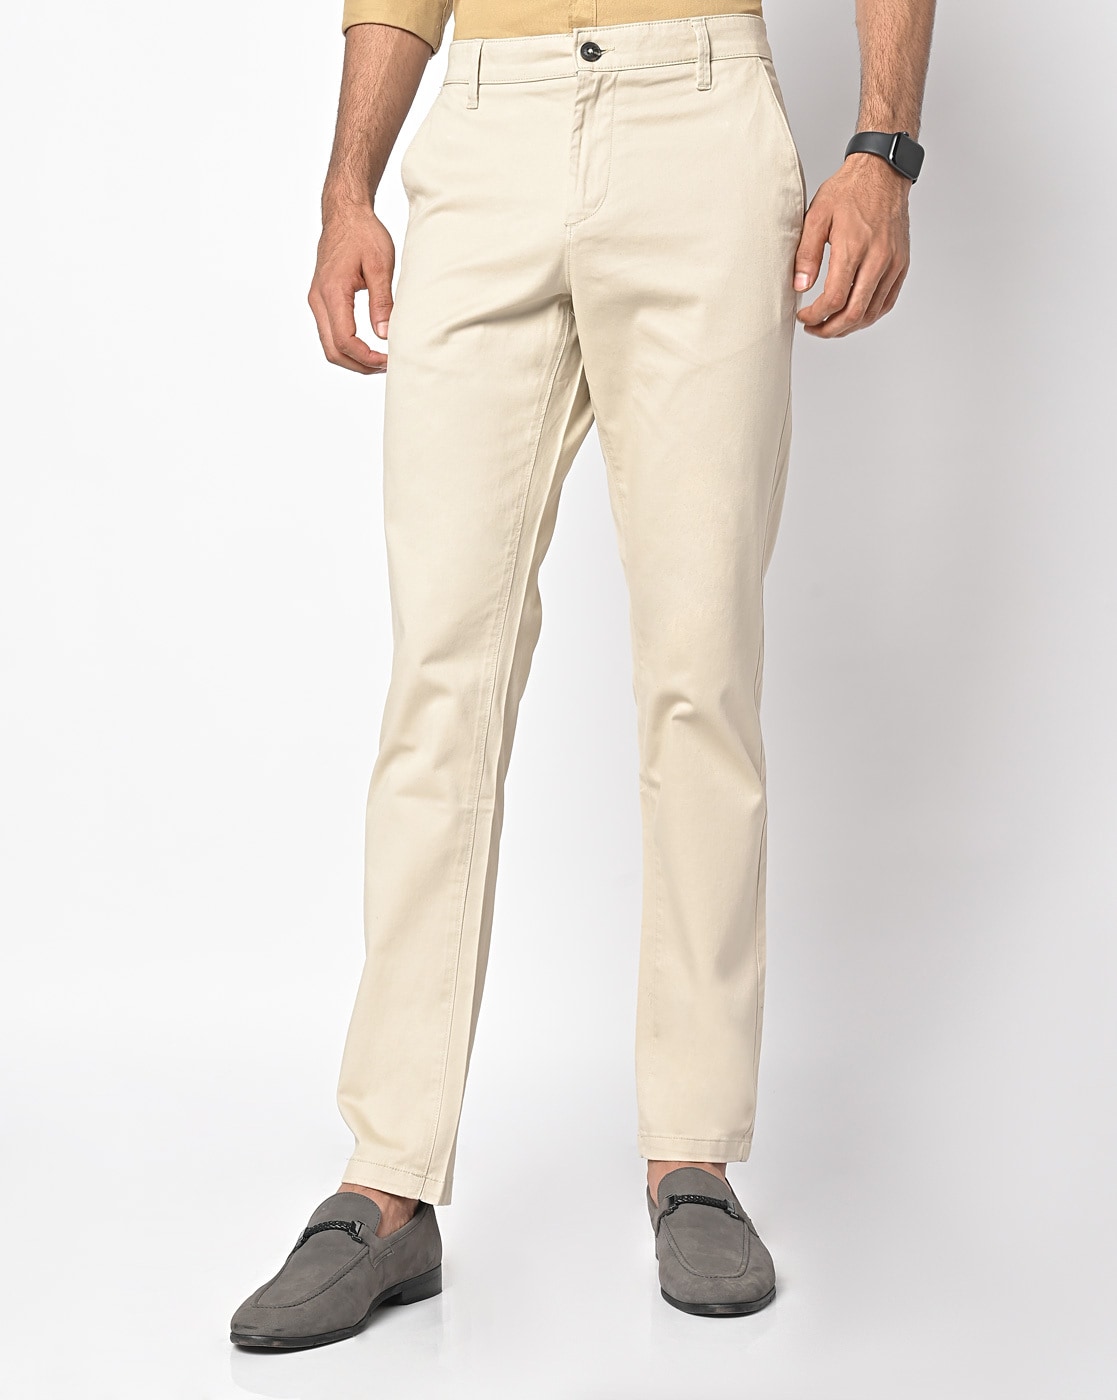 5 Best Chino Colors  Pants Every Man Should Own in 2022